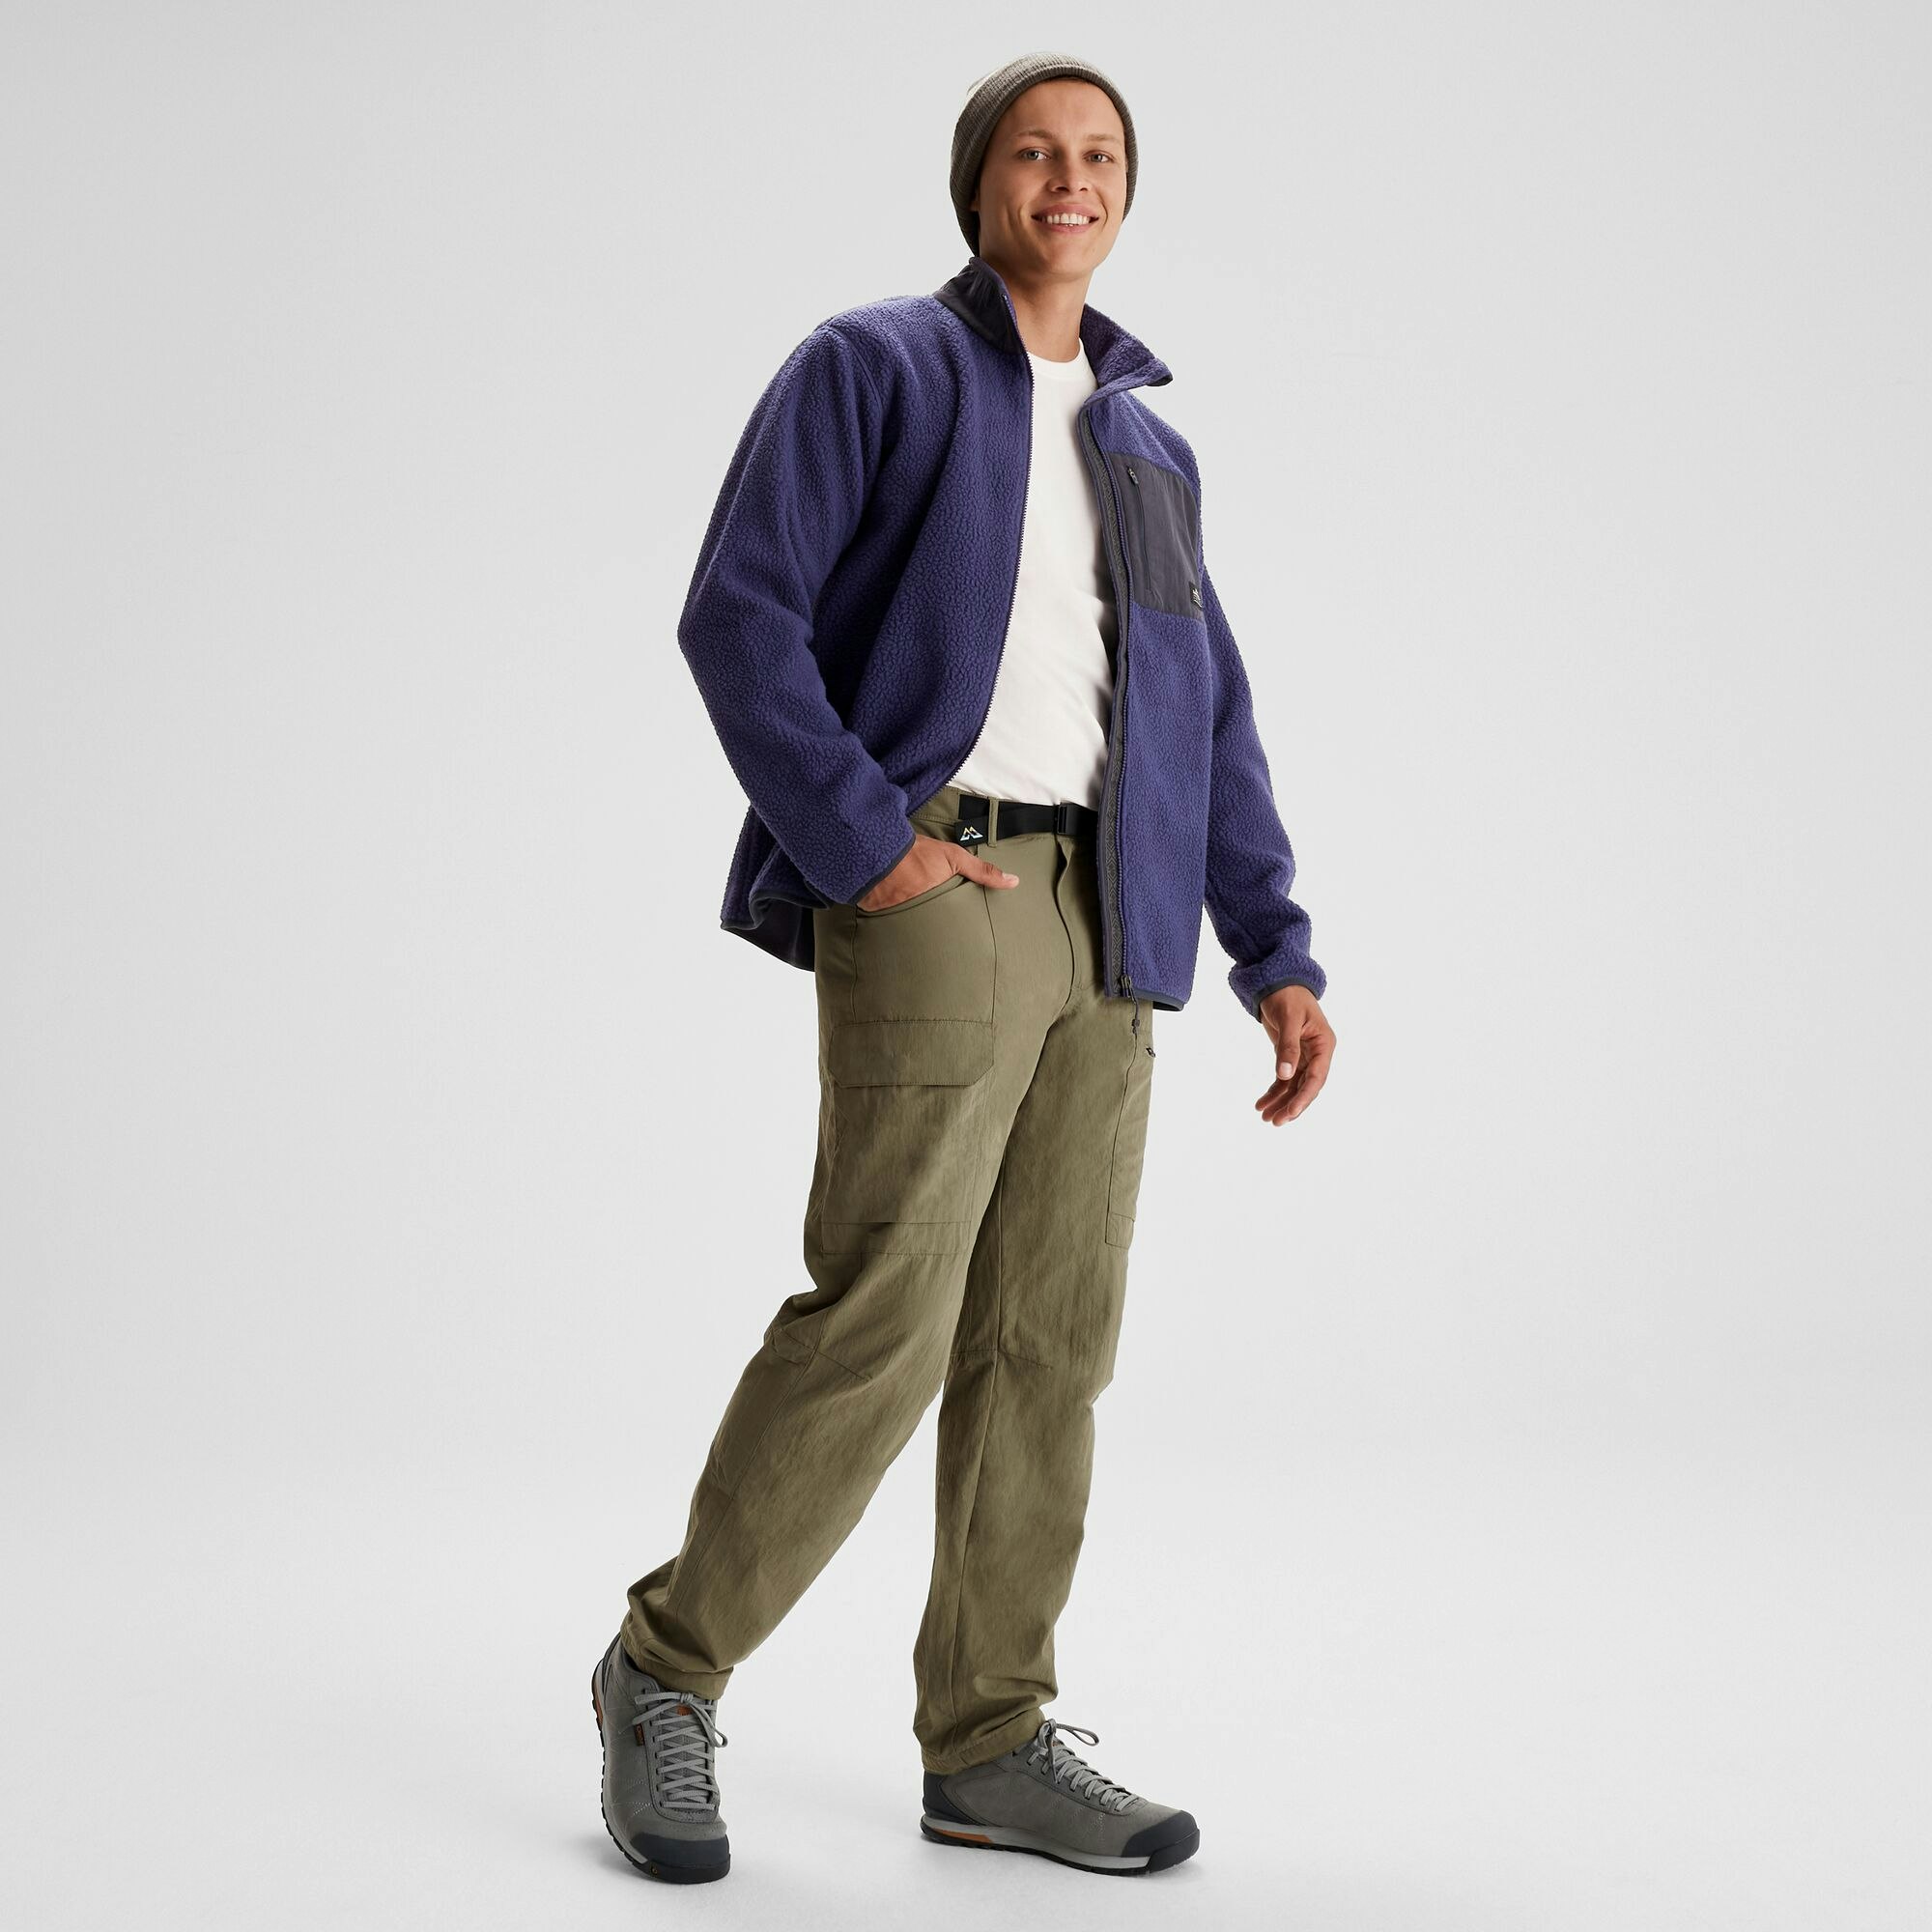 Lined Cargo Pants